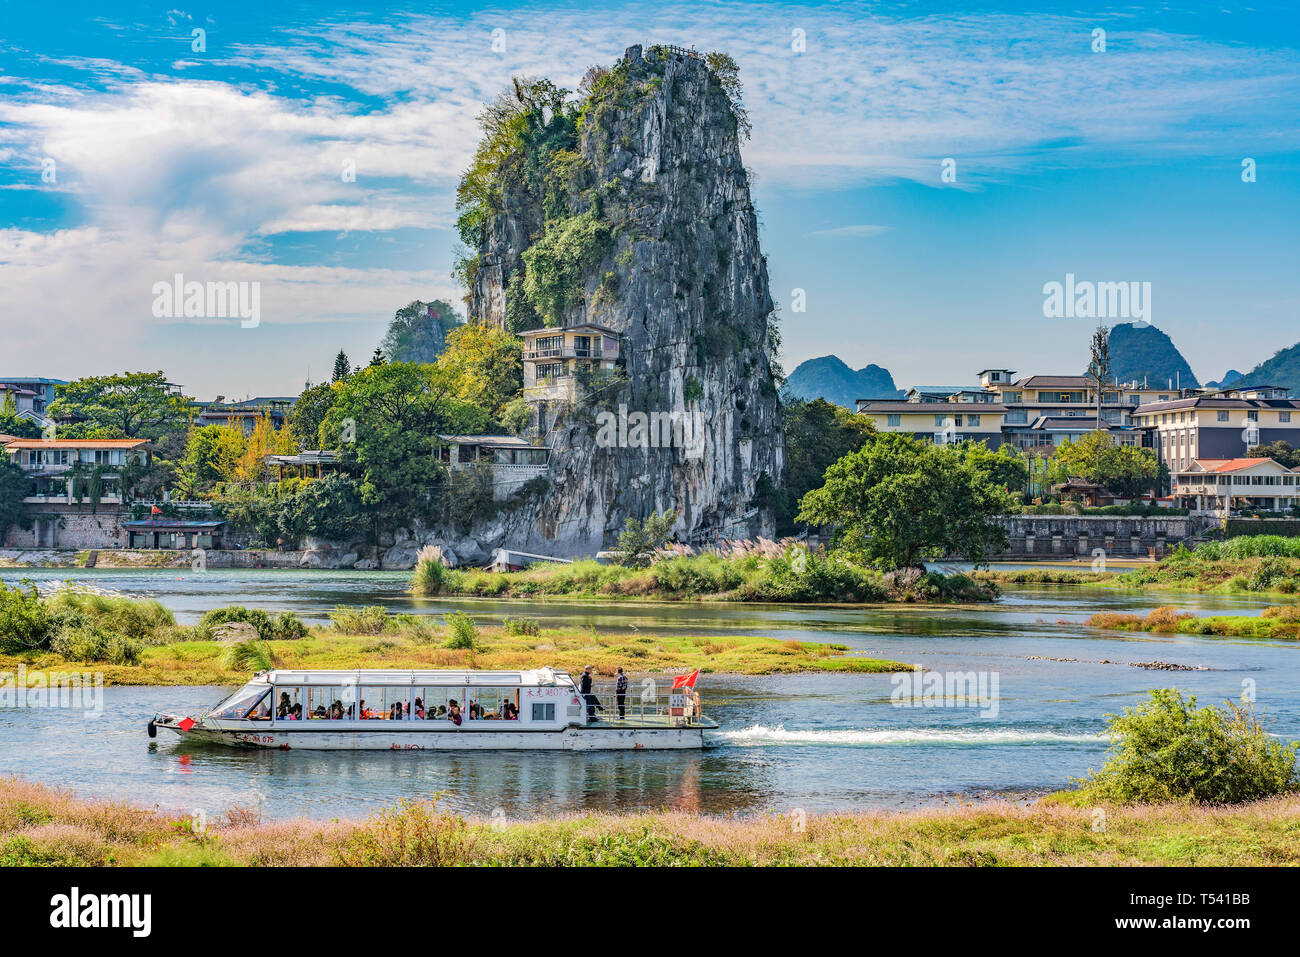 GUILIN, CHINA - NOVEMBER 01: Scenic view of Fubo hill and tour boat cruise along the Li river on November 01, 2018 in Guilin Stock Photo